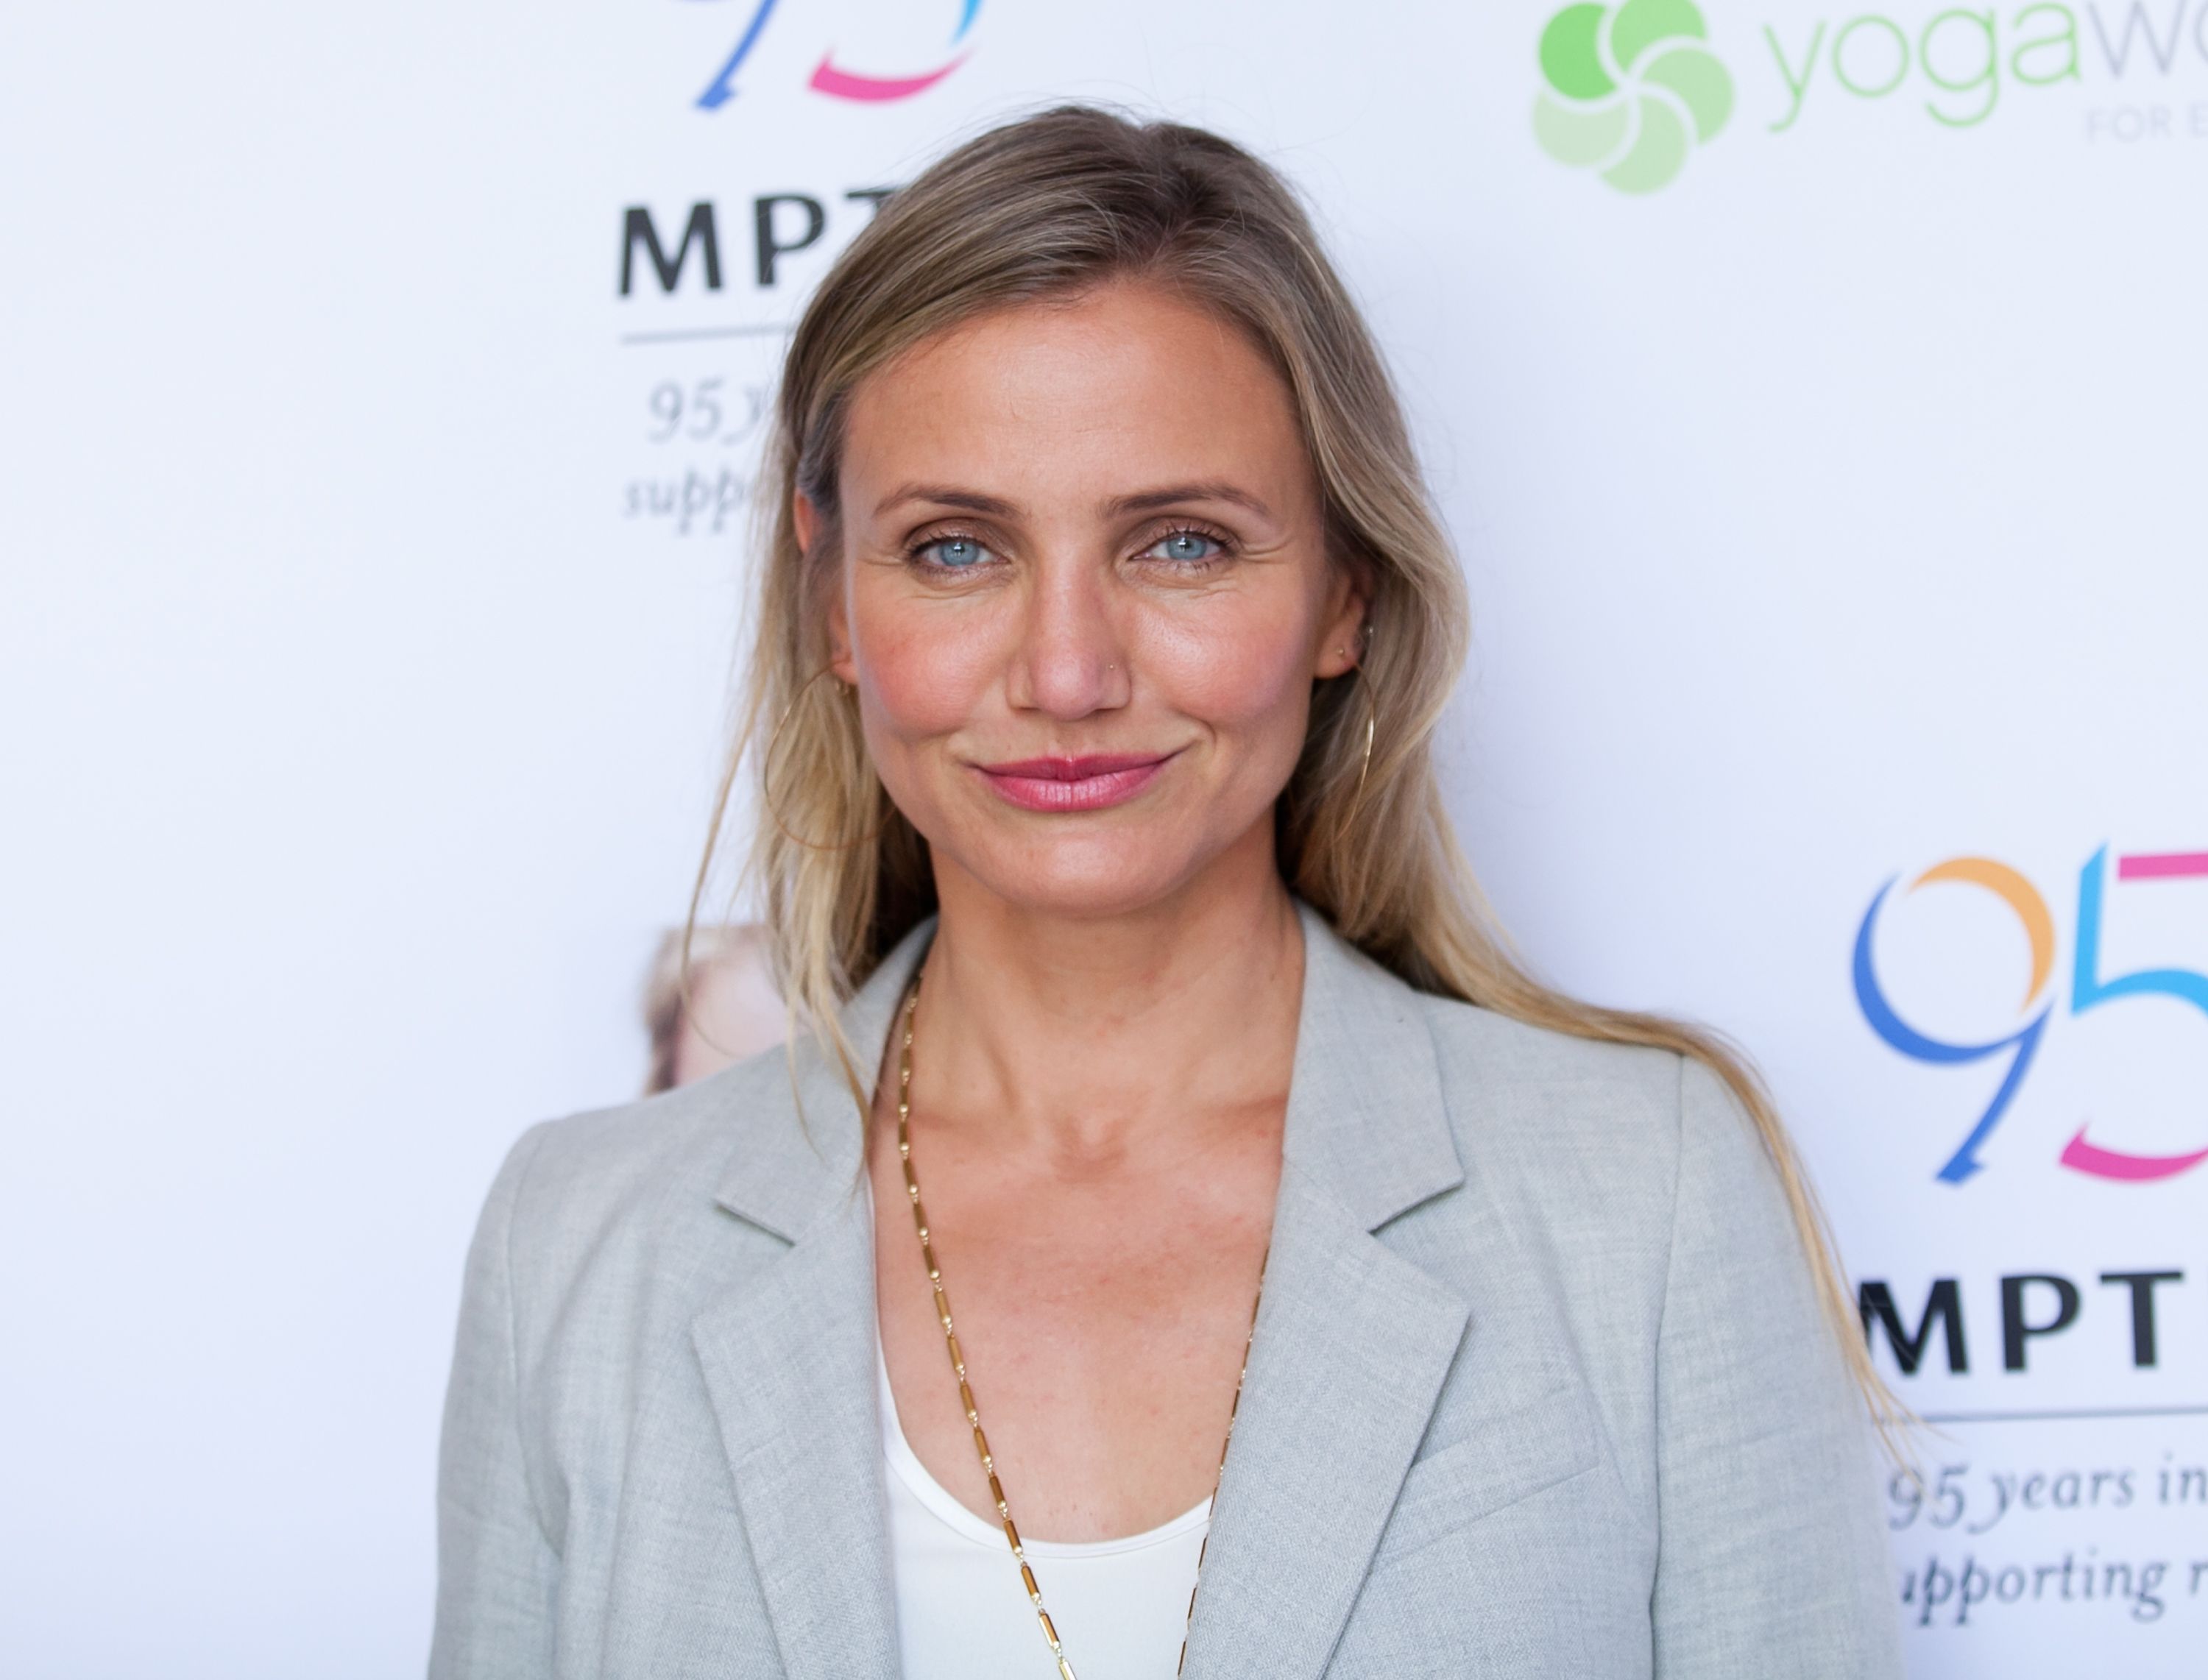 Cameron Diaz, 49, Opens Up About Aging I Want to Live to Be 110